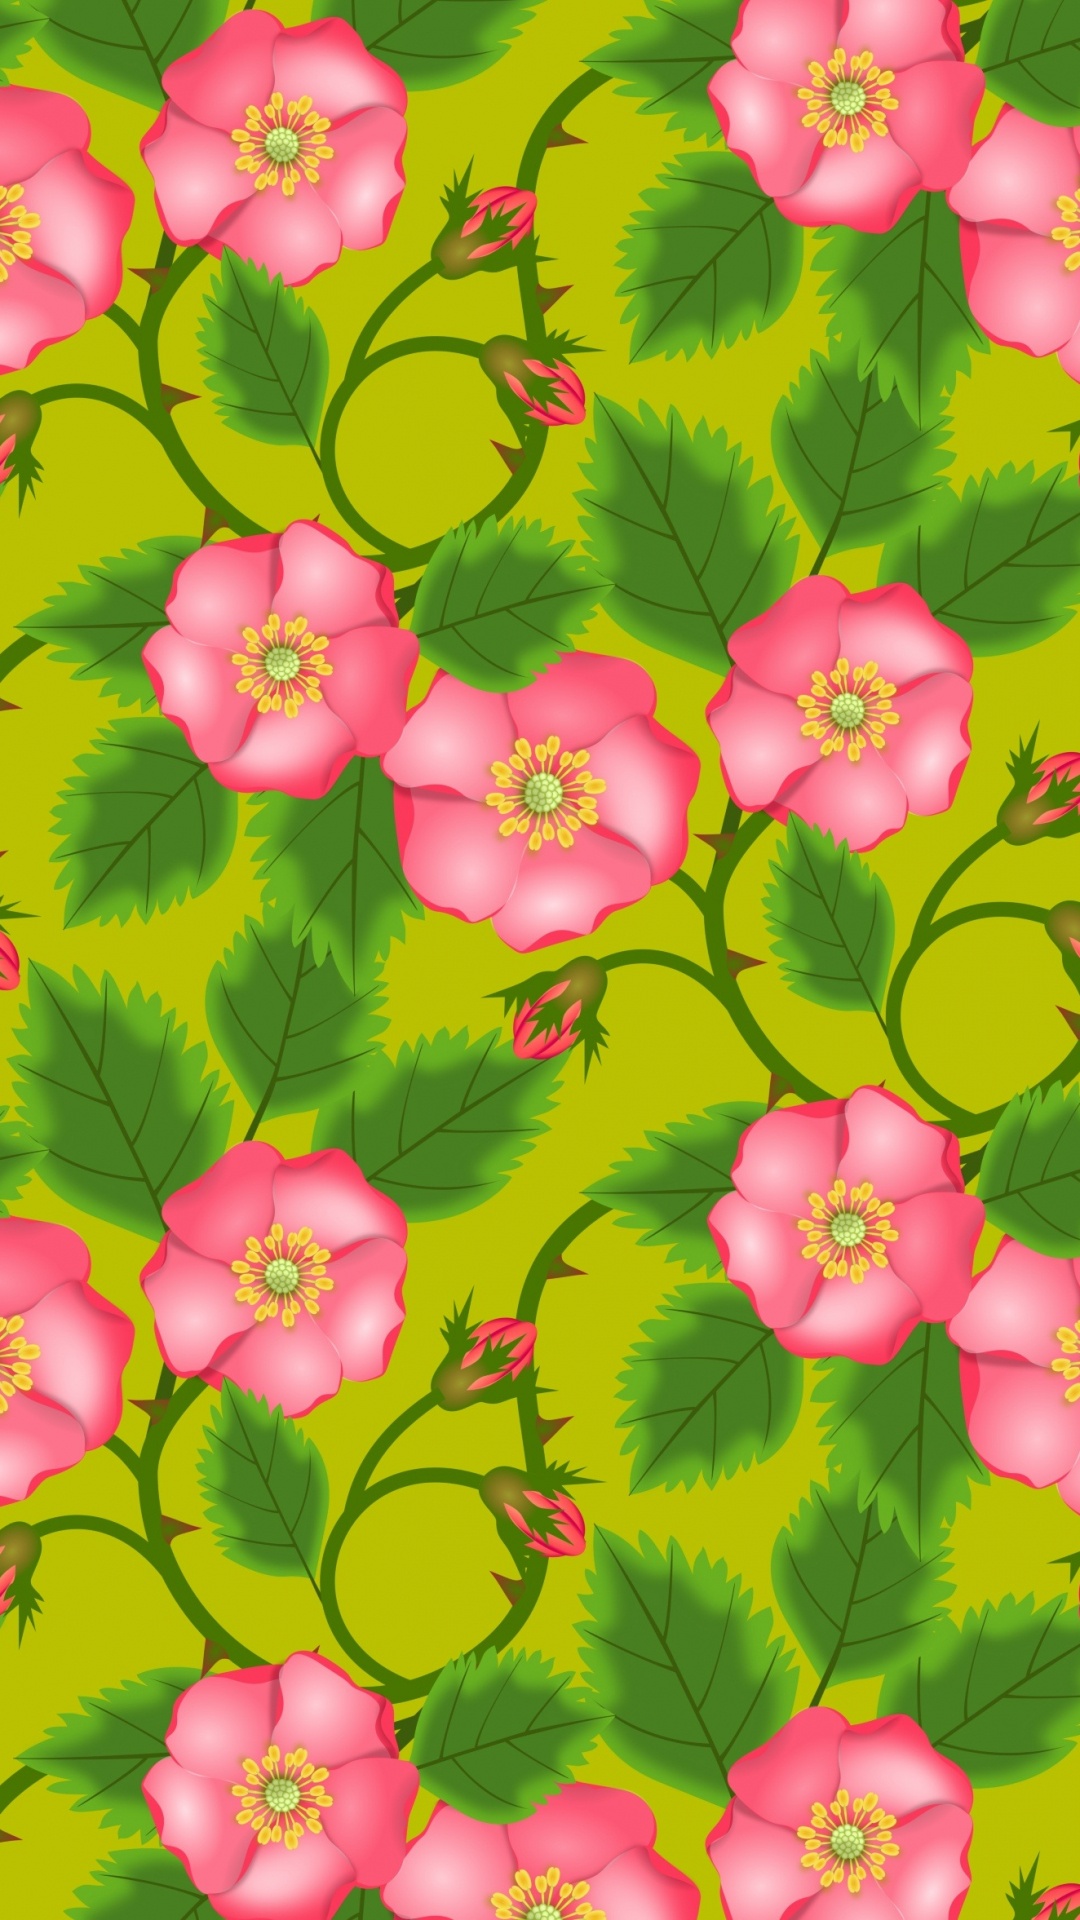 Pink and Red Flowers on Green Leaves. Wallpaper in 1080x1920 Resolution